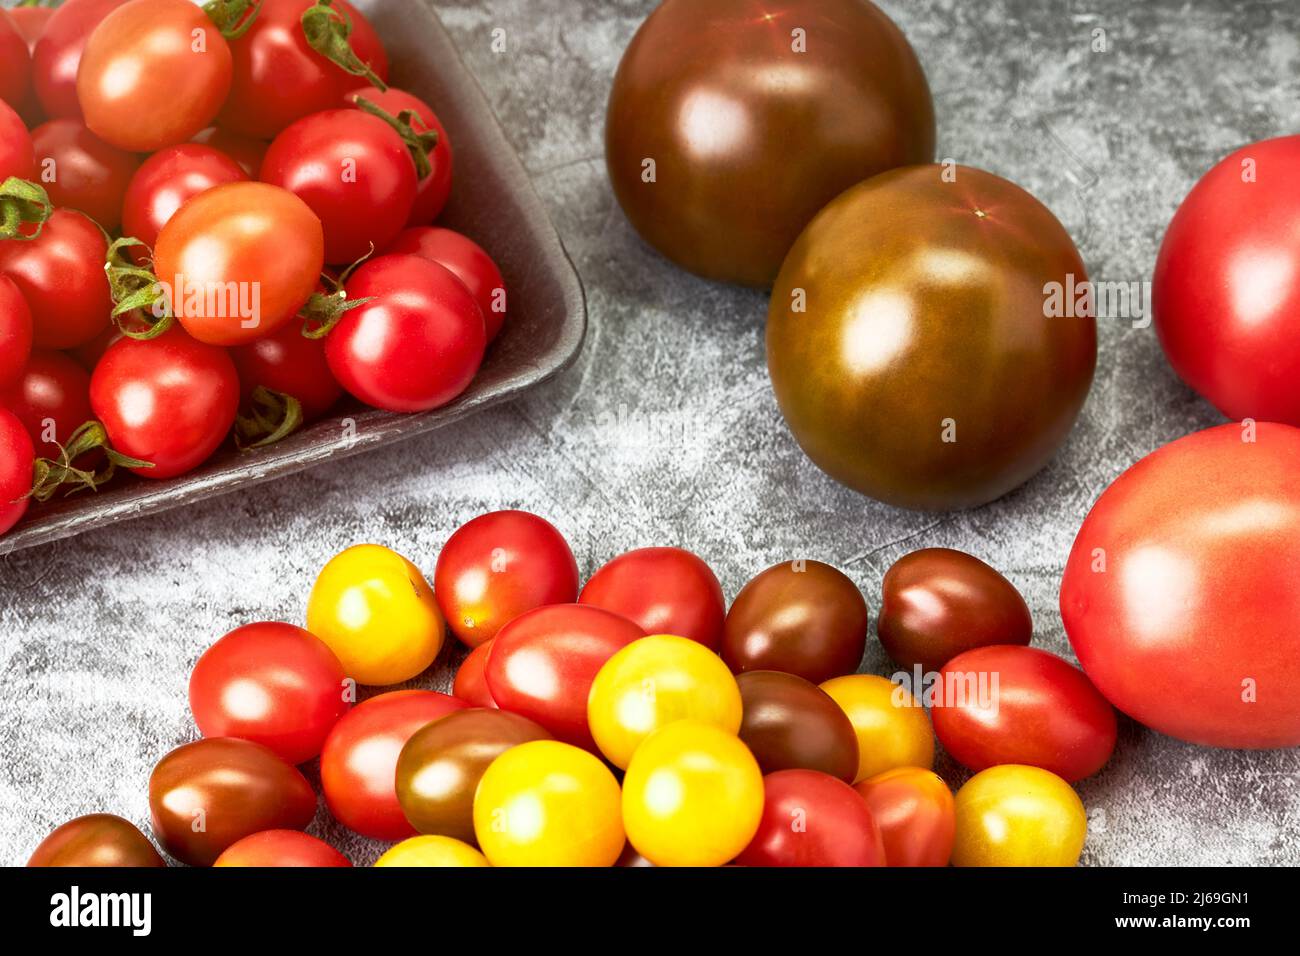 Tray with cherry tomatoes of various colors. Healthy food. Vegetarian and vegan food Stock Photo